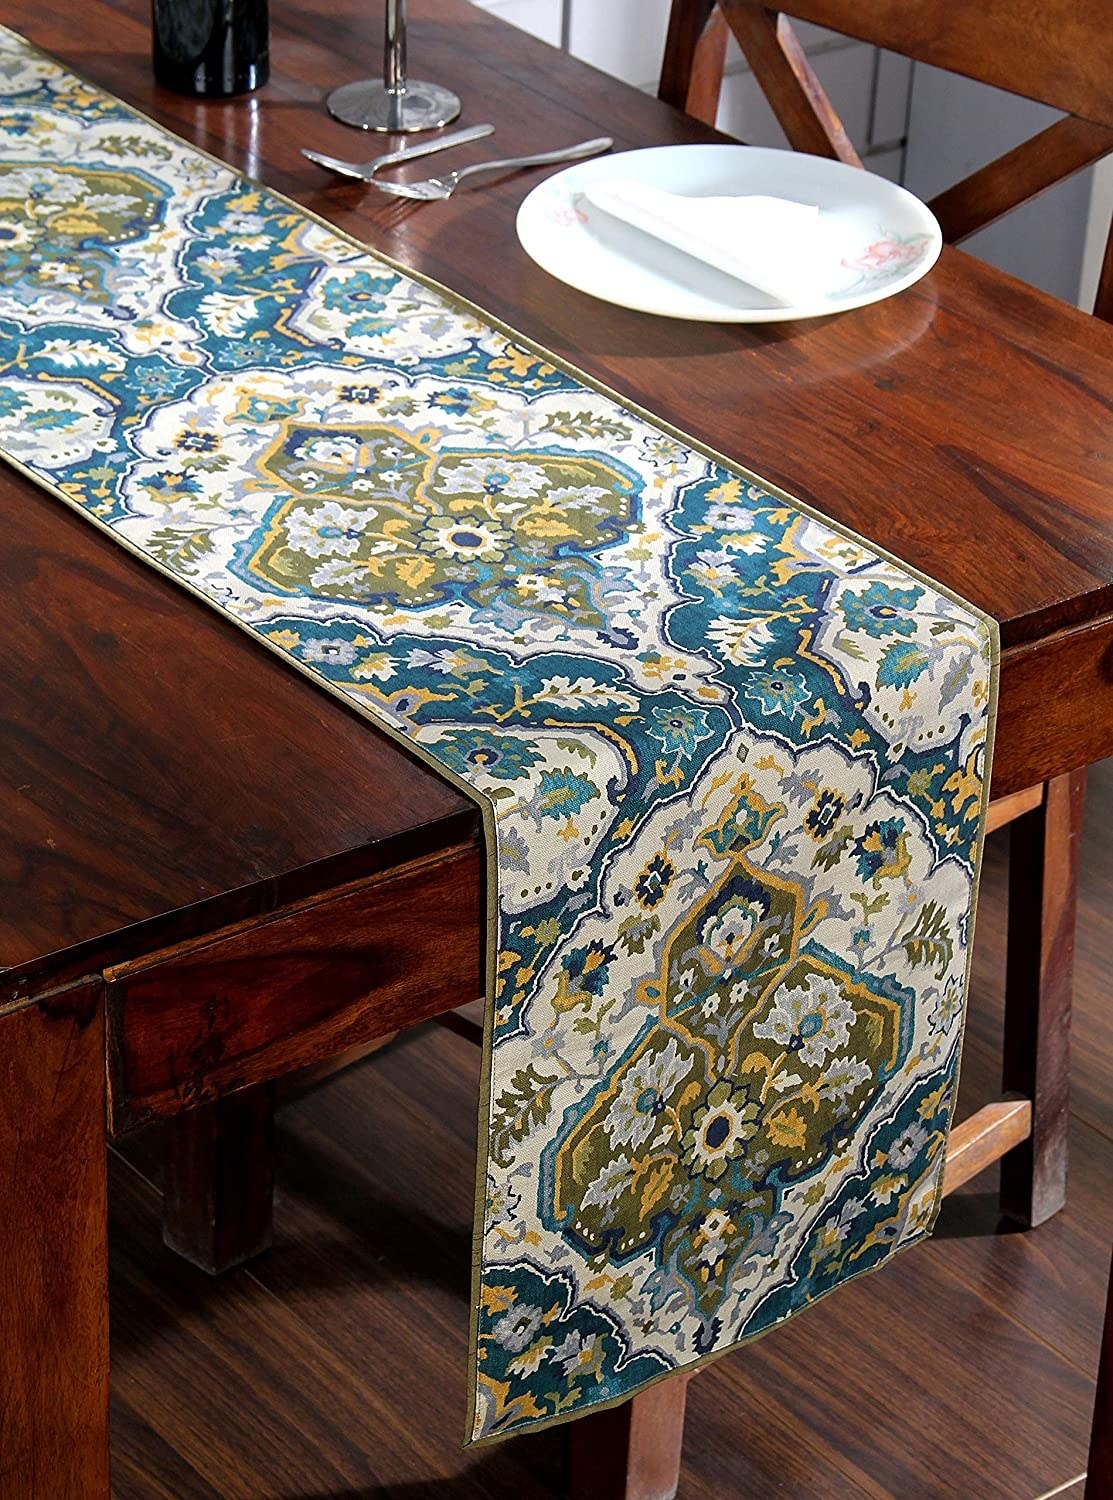 A floral table runner on a table